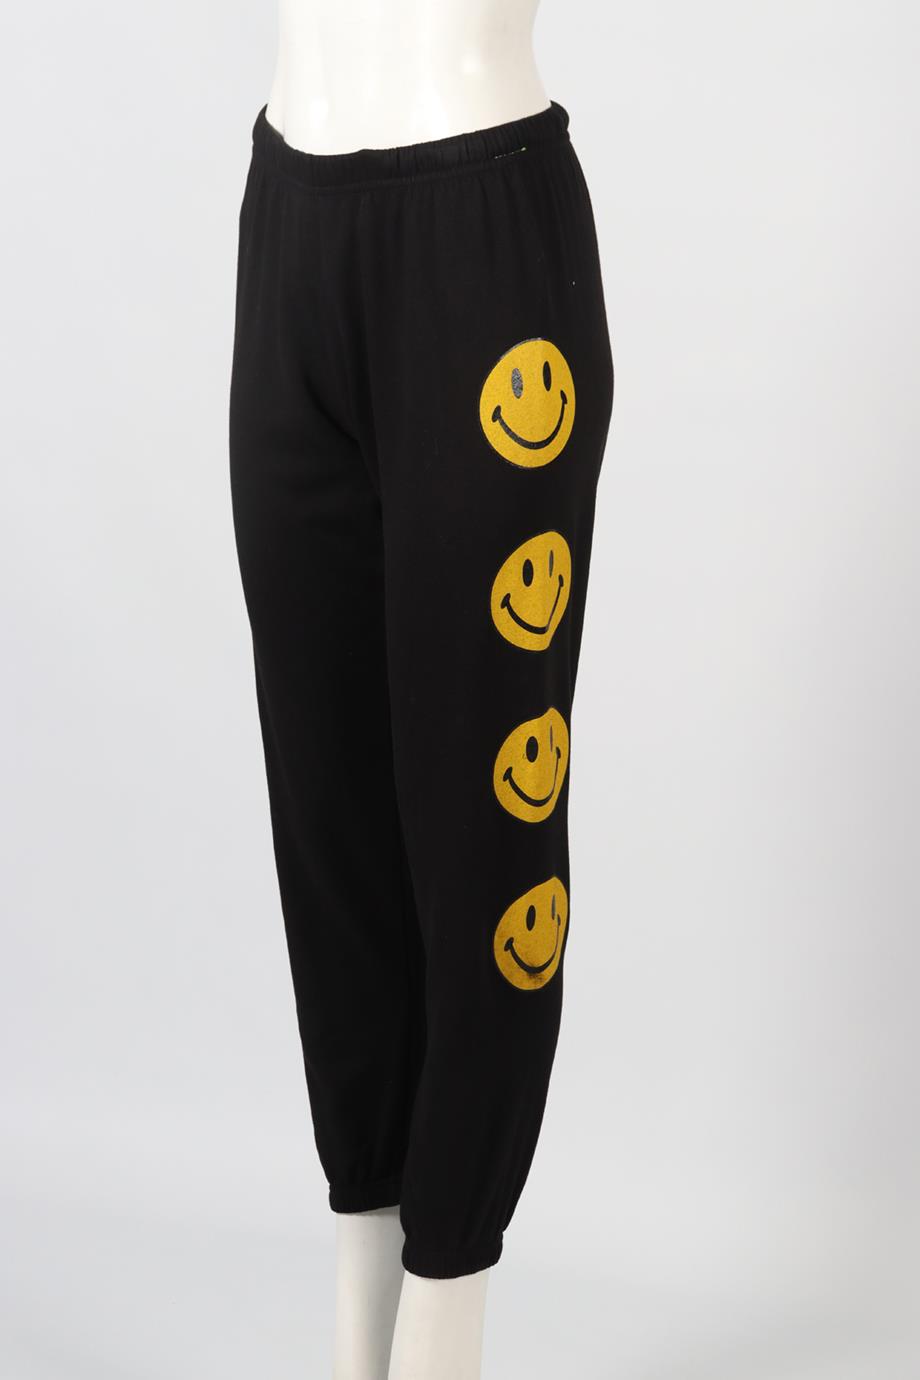 AVIATOR NATION COTTON BLEND TRACK PANTS SMALL